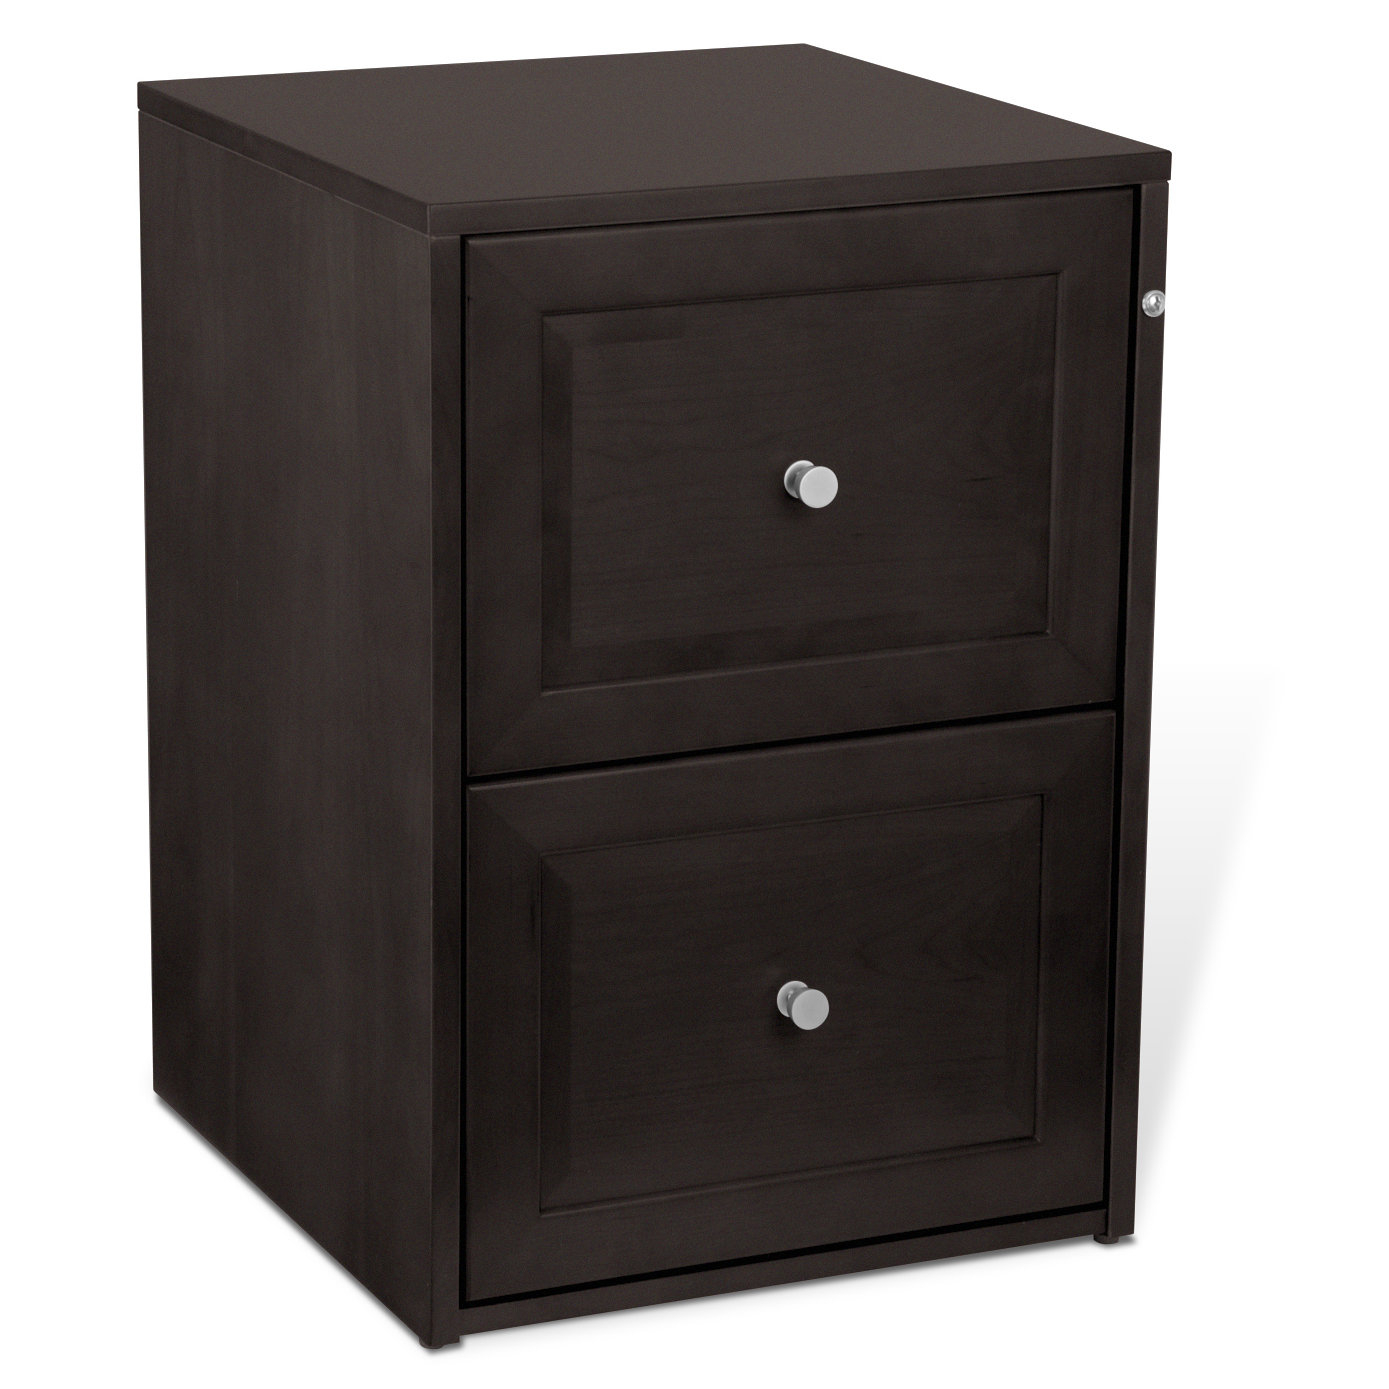 Haaken Furniture Vip Collection 2 Drawer Vertical Filing Cabinet intended for proportions 1389 X 1389